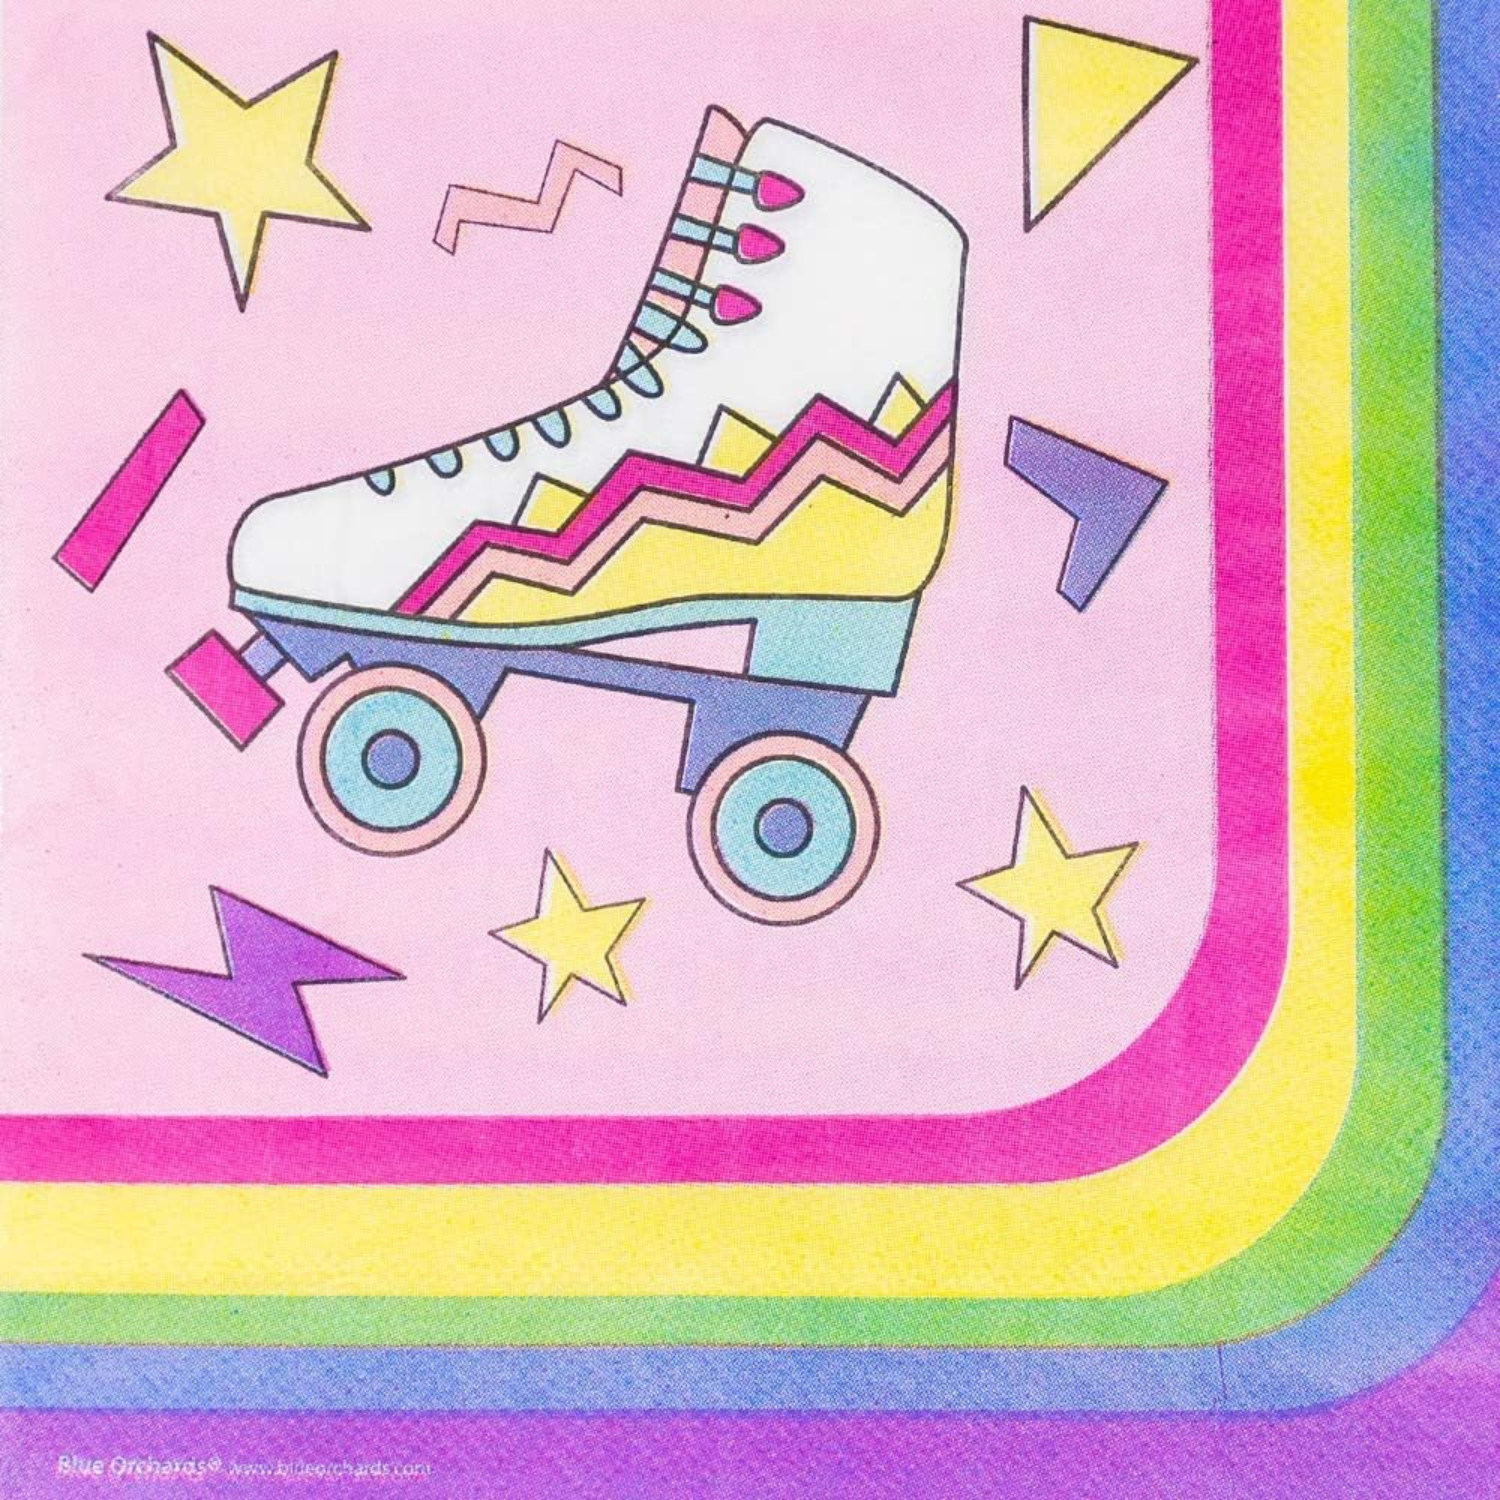 Roller Skate Party Supplies Packs (For 16 Guests)